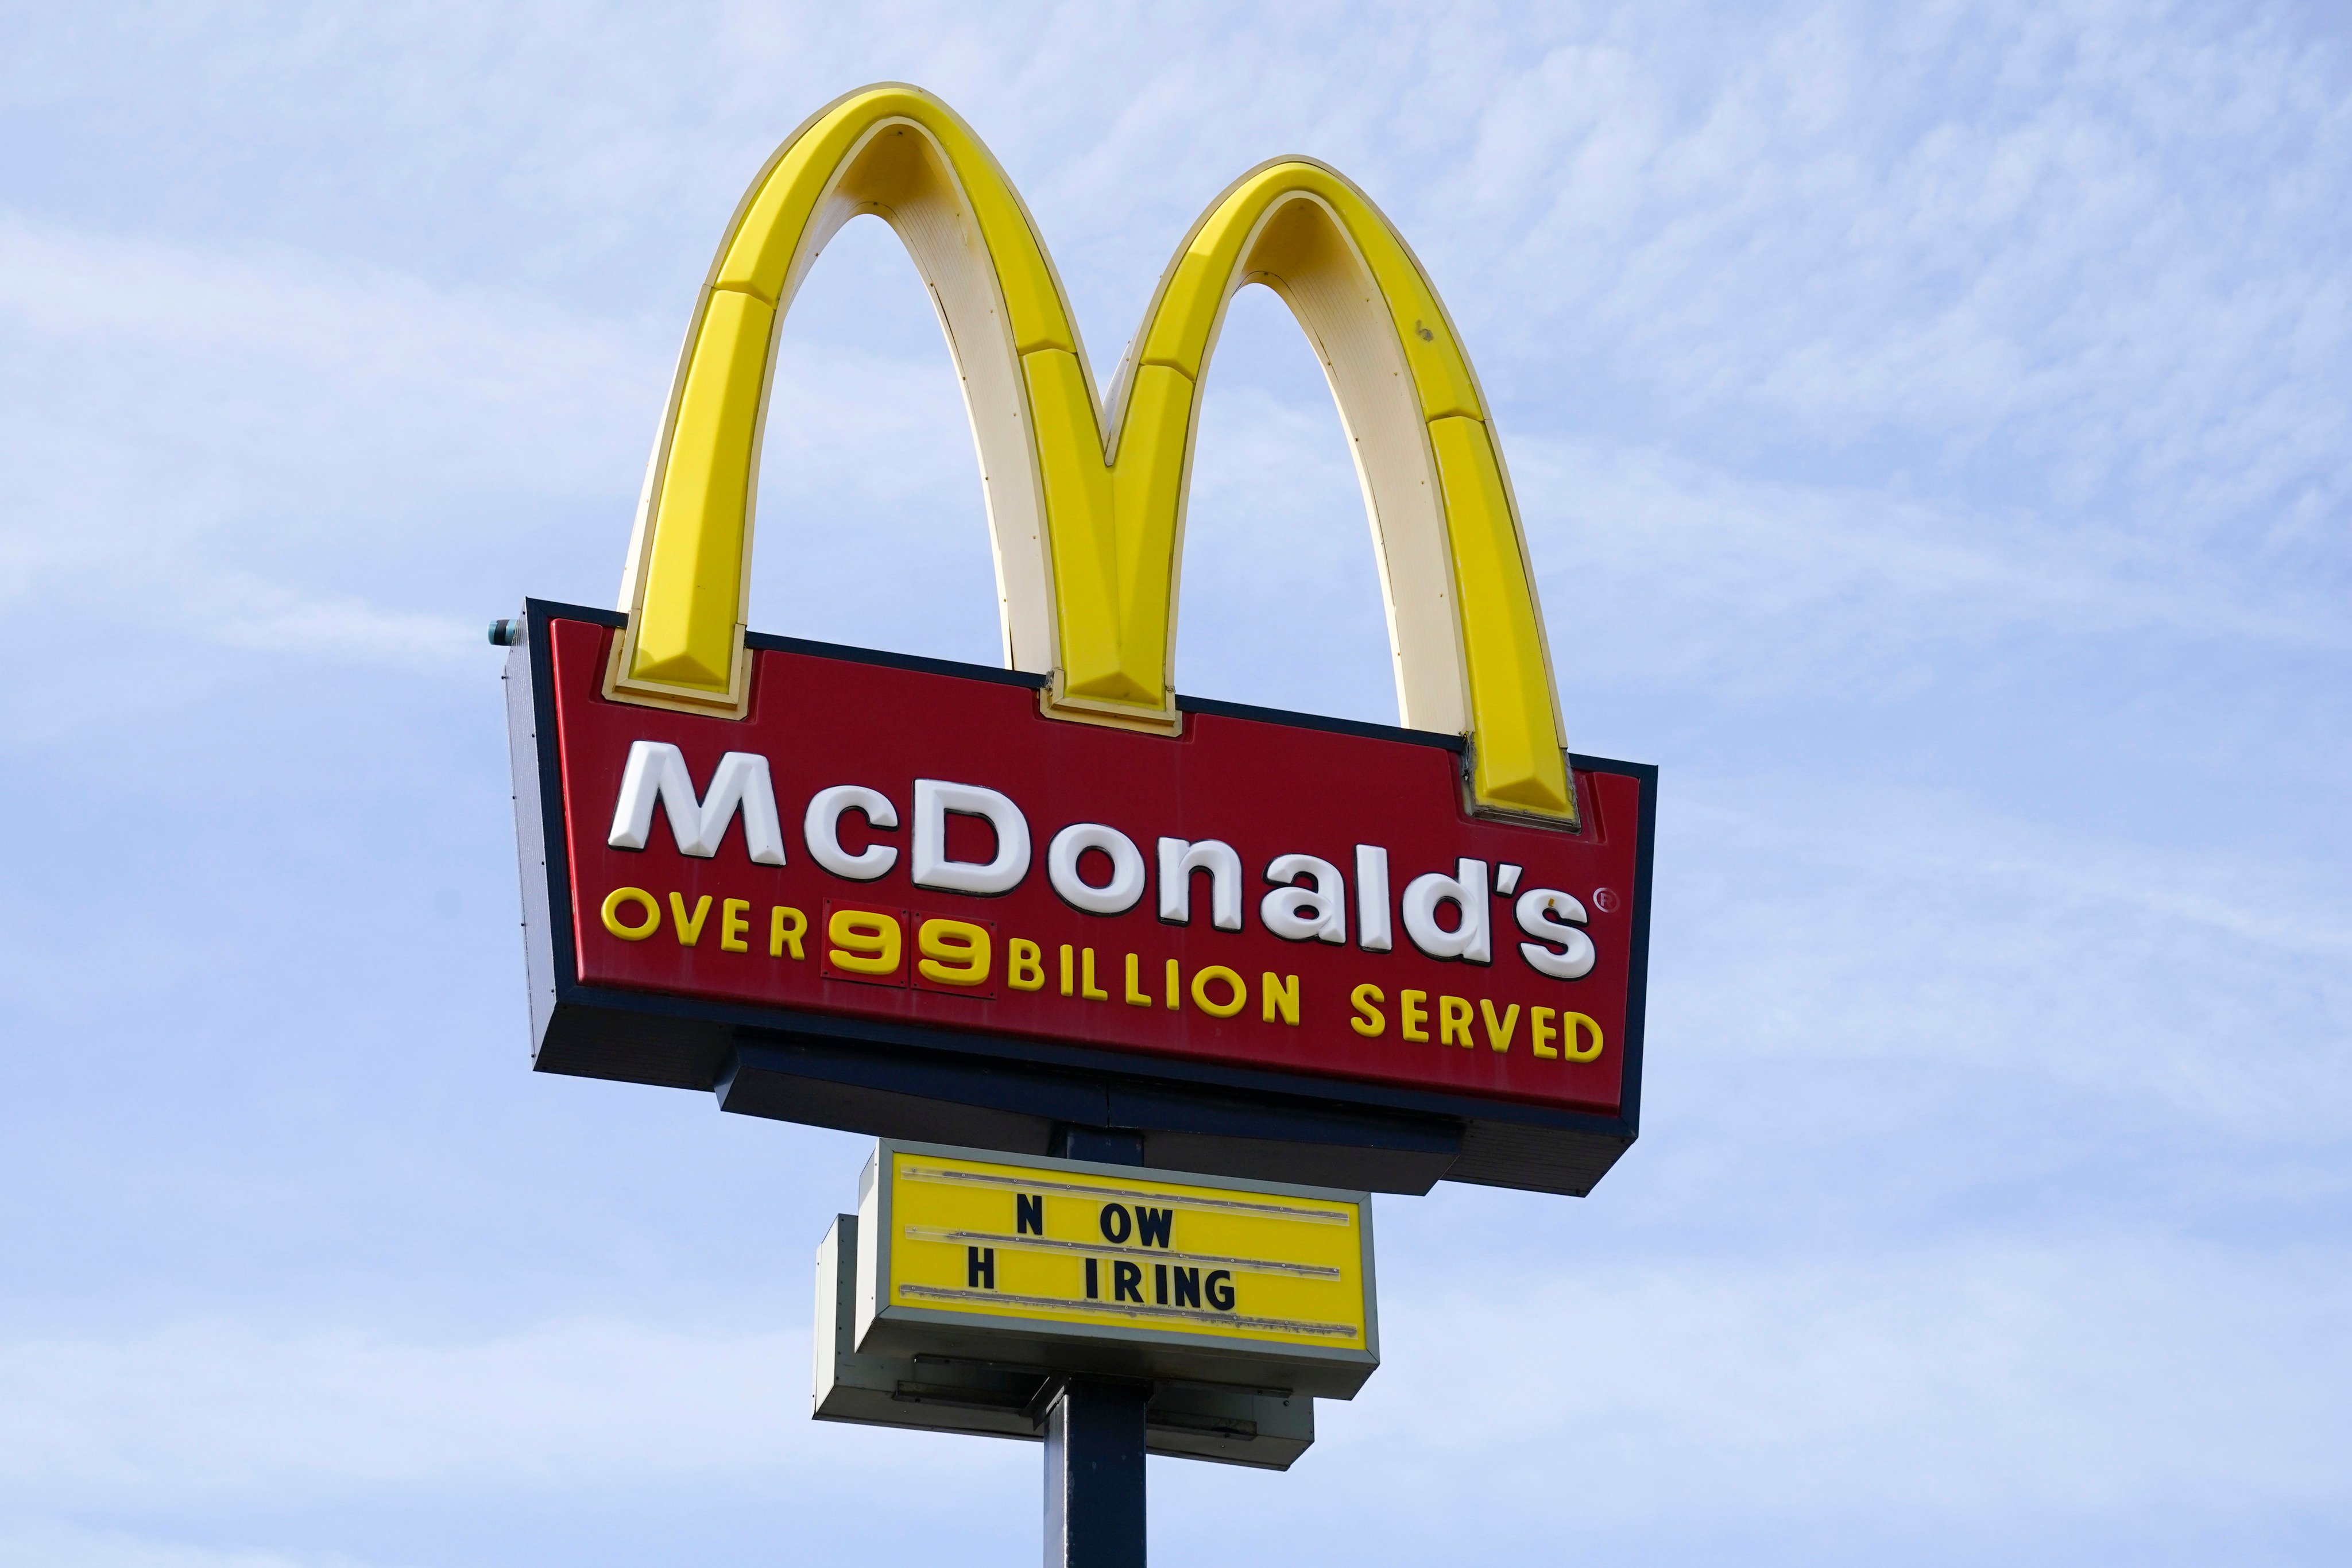 Lawyers for McDonald’s argued that the food had to be hot to avoid salmonella poisoning. Photo: AP